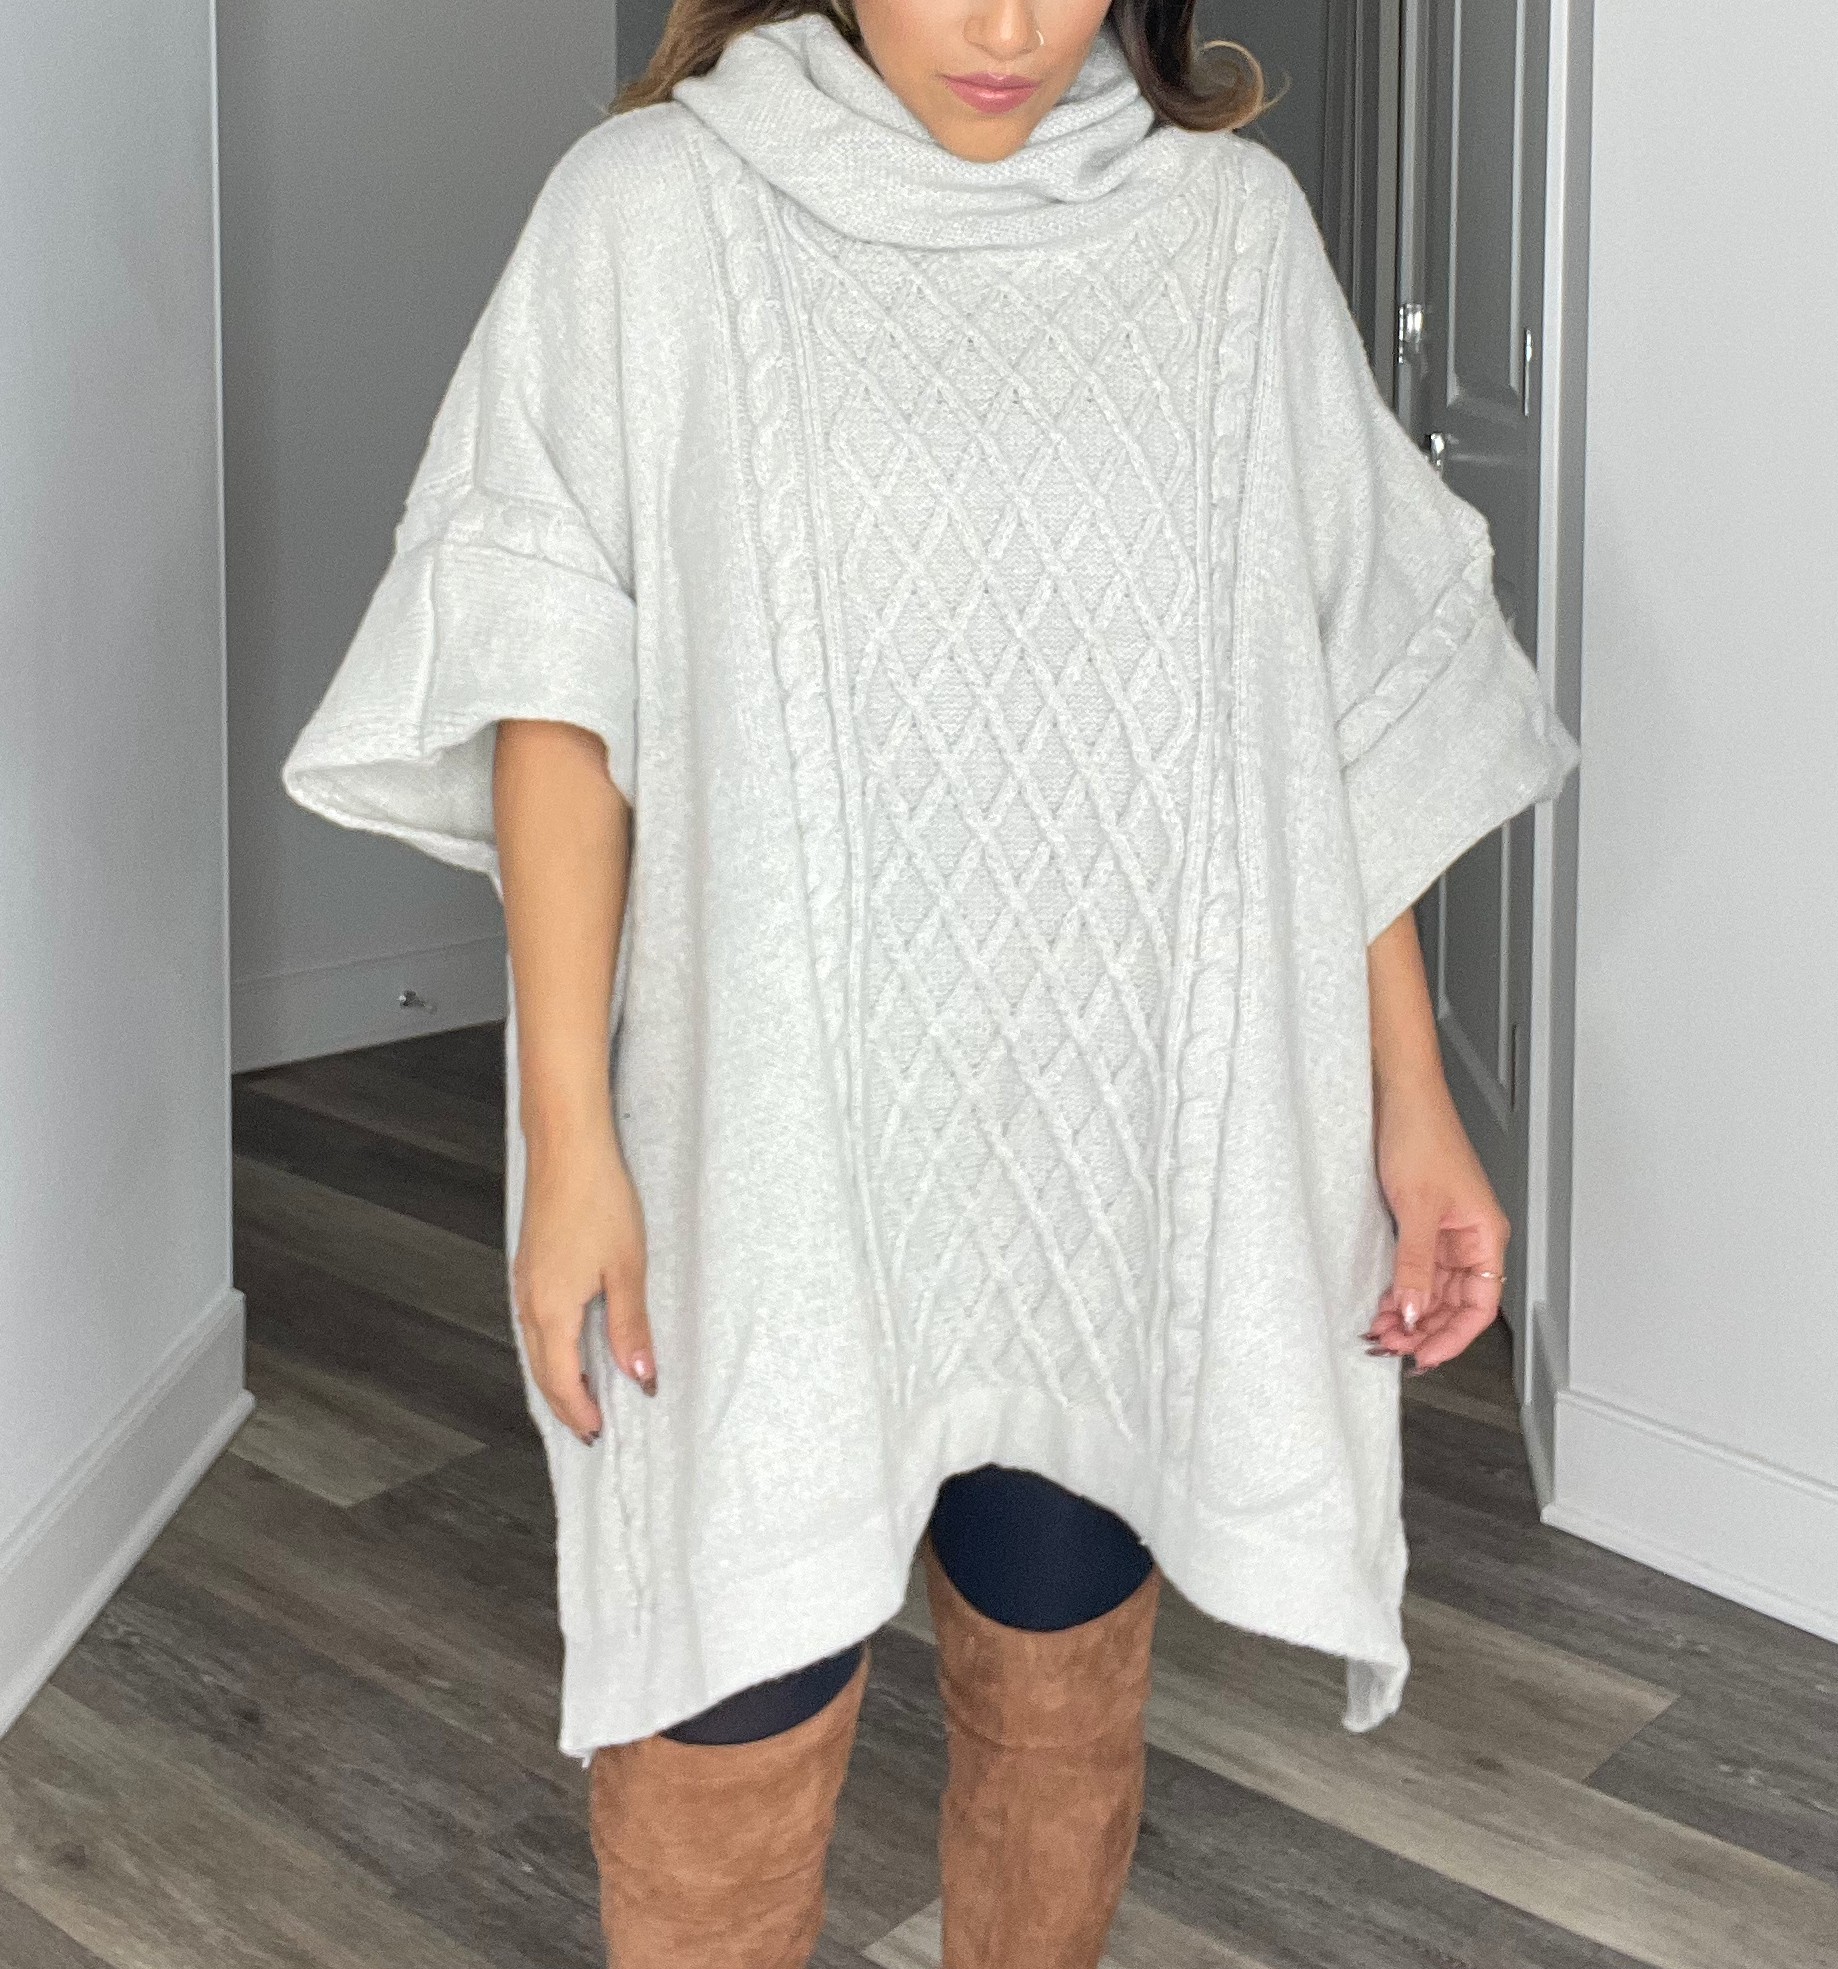 Cable knit Poncho Sweater